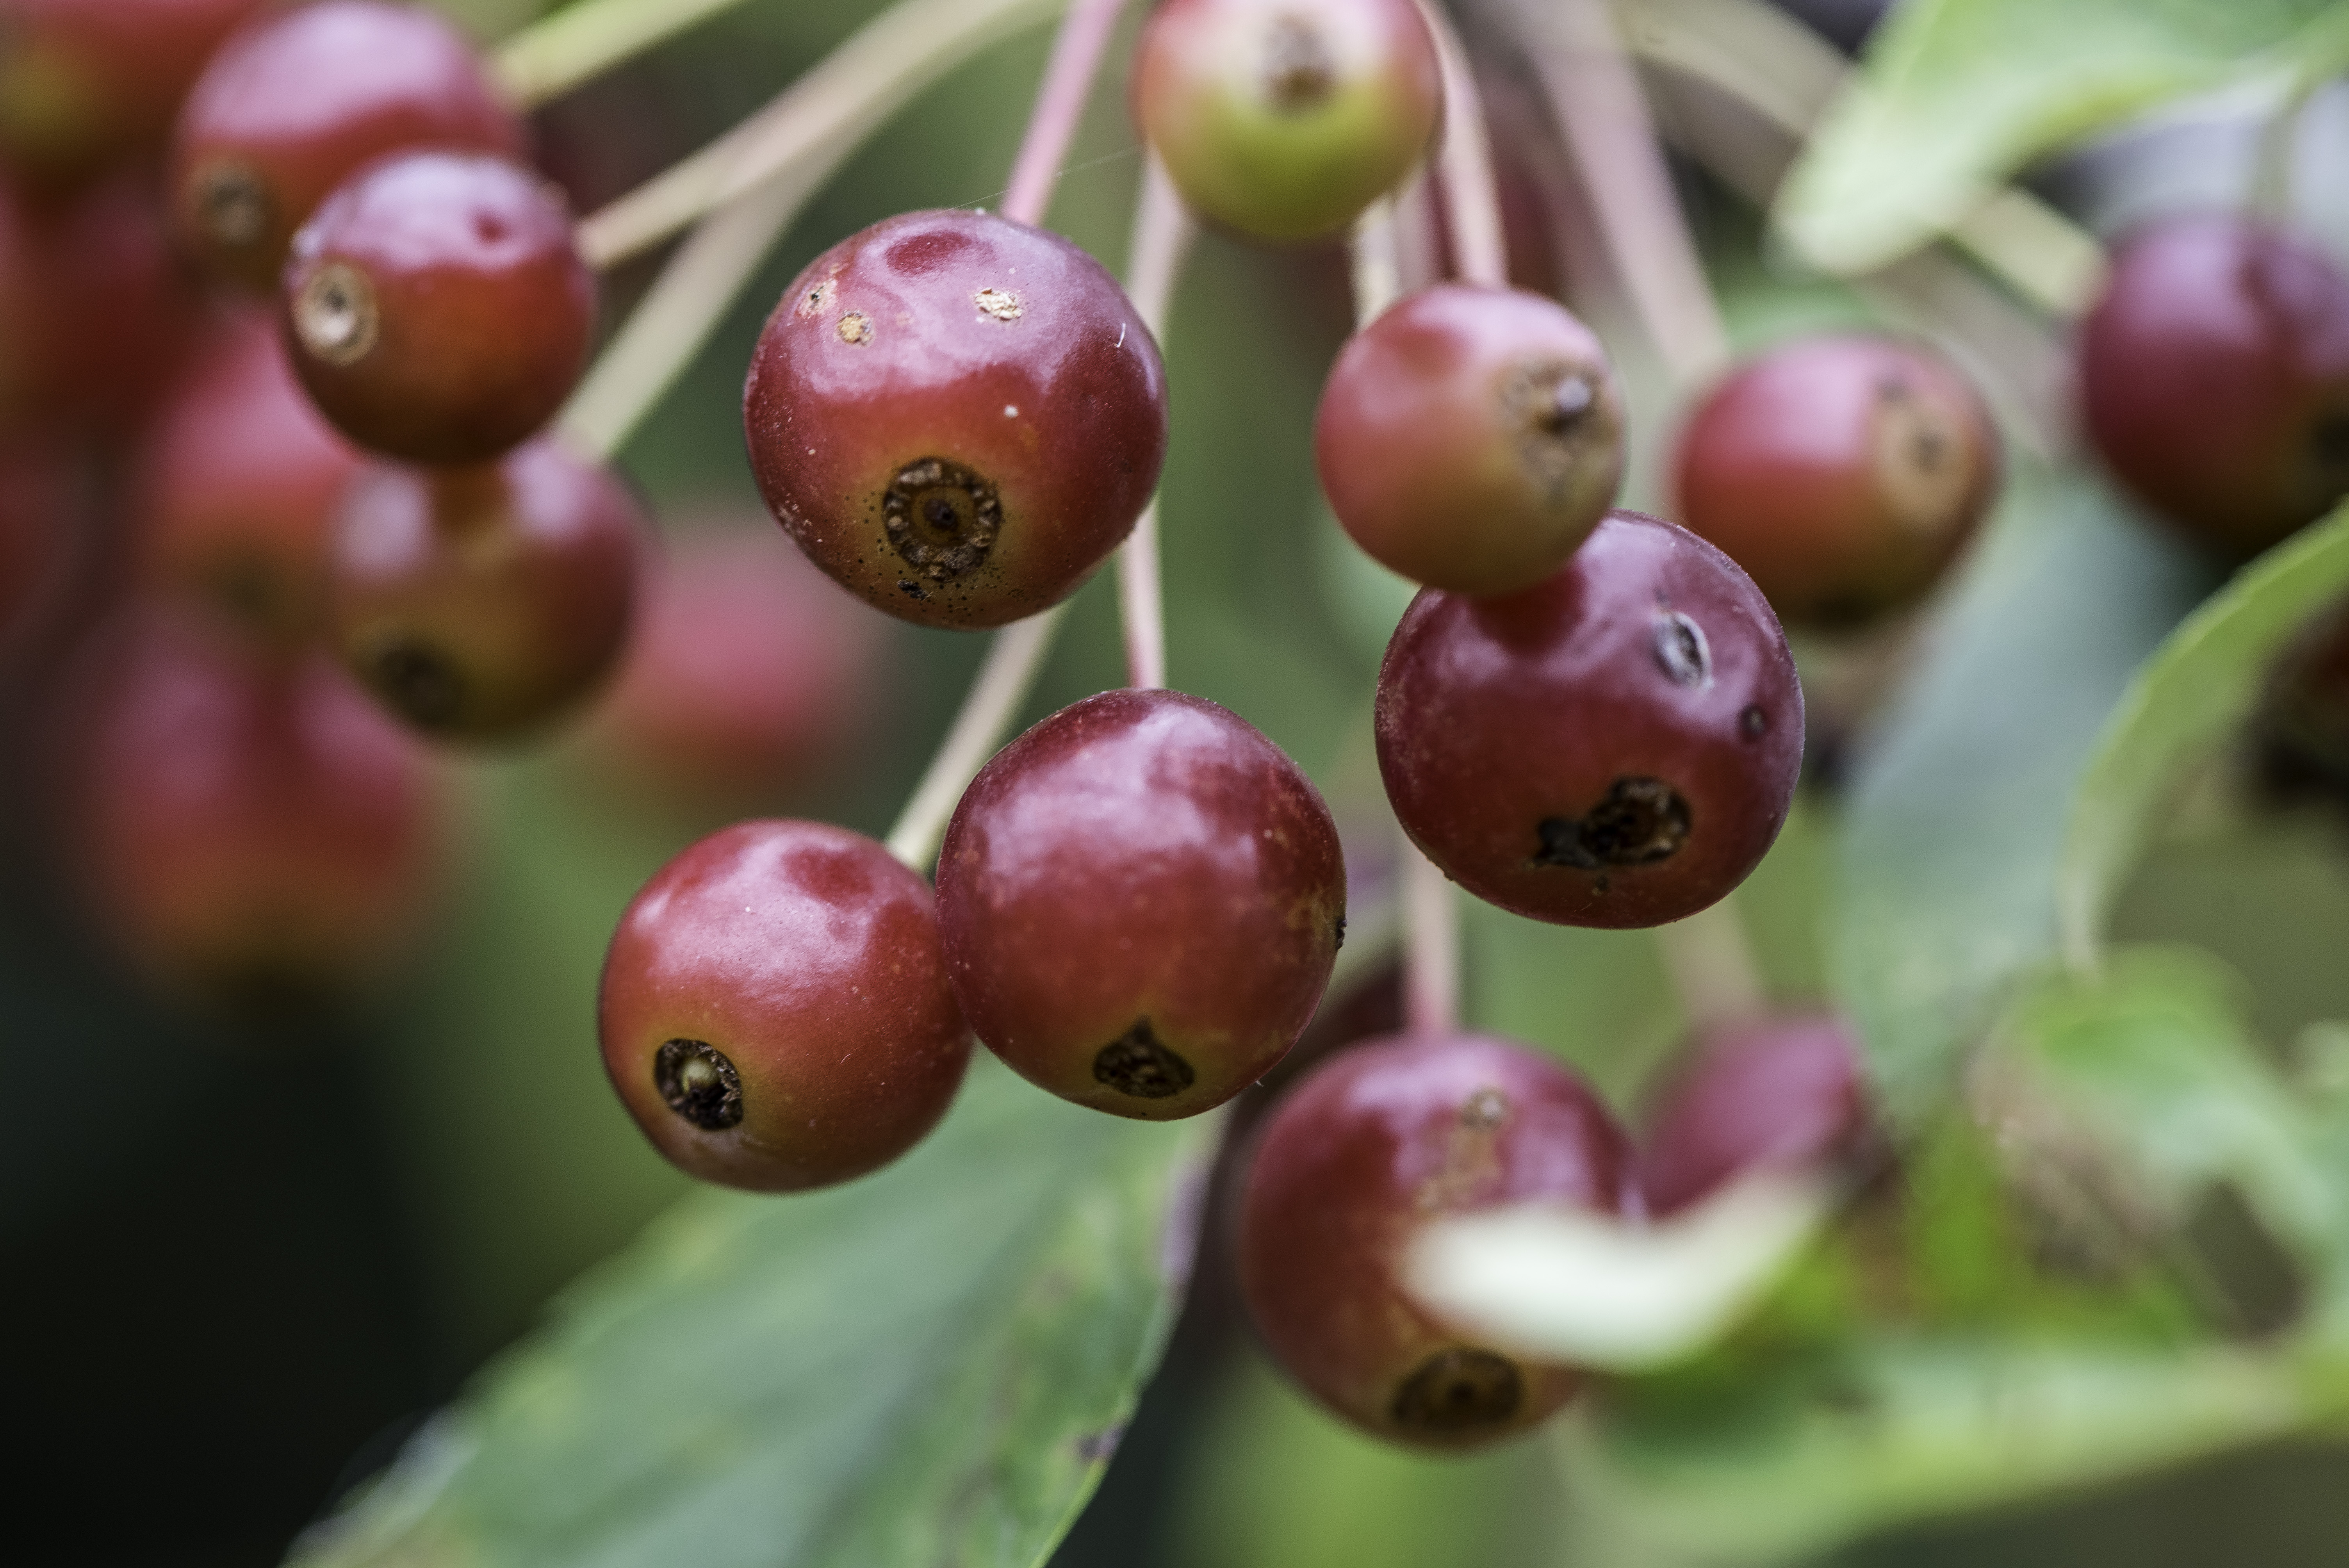 Red Berries on a plant image - Free stock photo - Public Domain ...